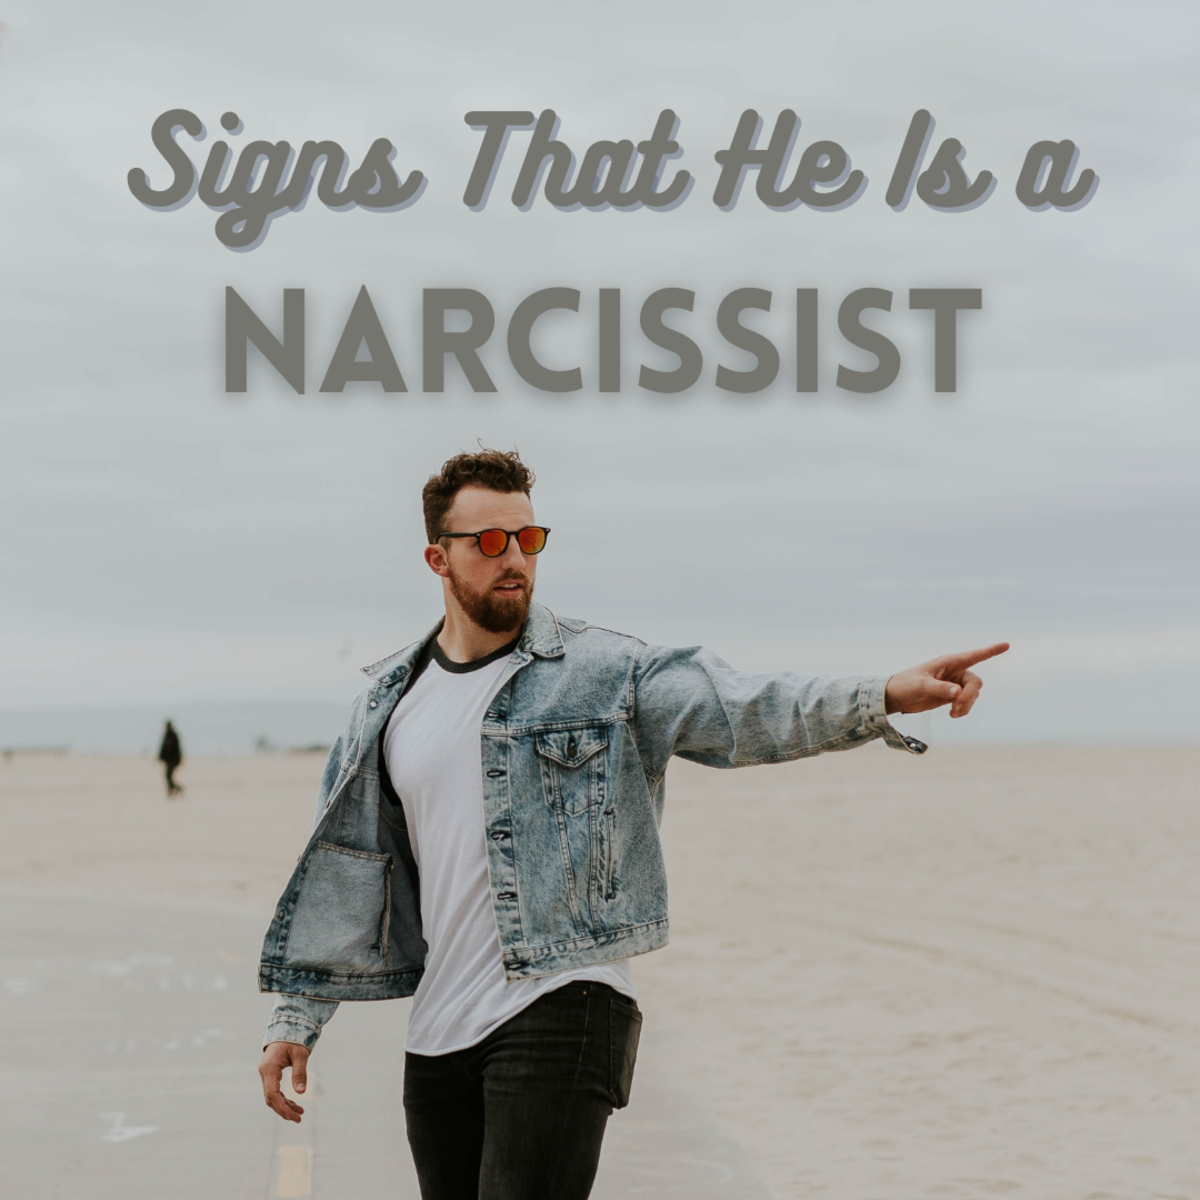 25 signs that indicate your man is a narcissist